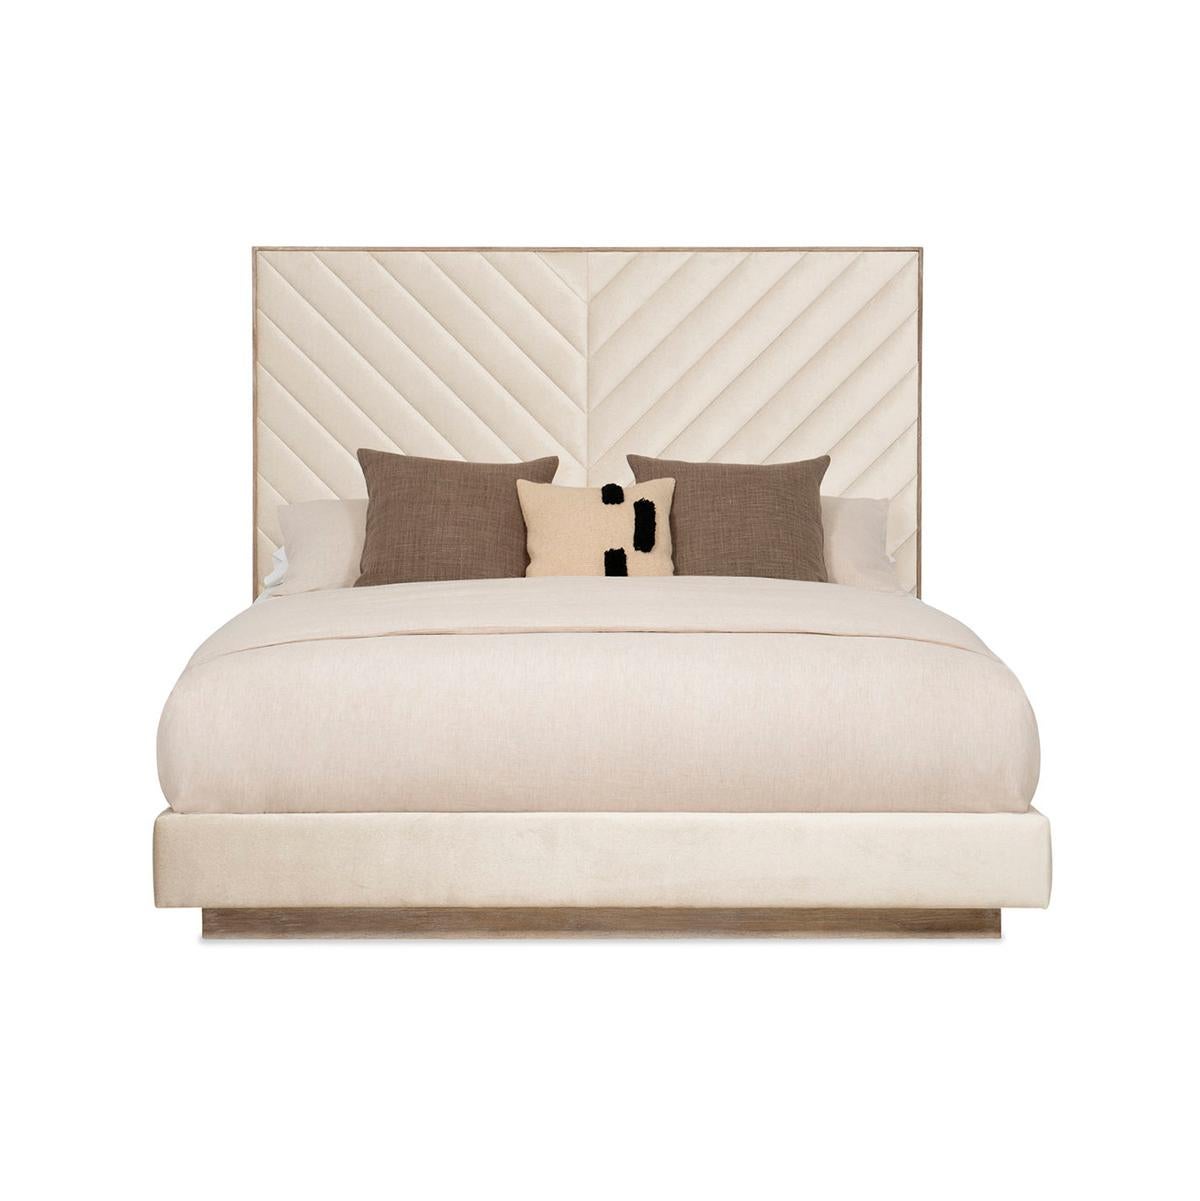 With an Ash Driftwood finish frame. It has a tall upholstered headboard with a modern channel tufting design of converging angles that meet in the center to create a mesmerizing chevron. This bed’s fully finished sides appear to float above the